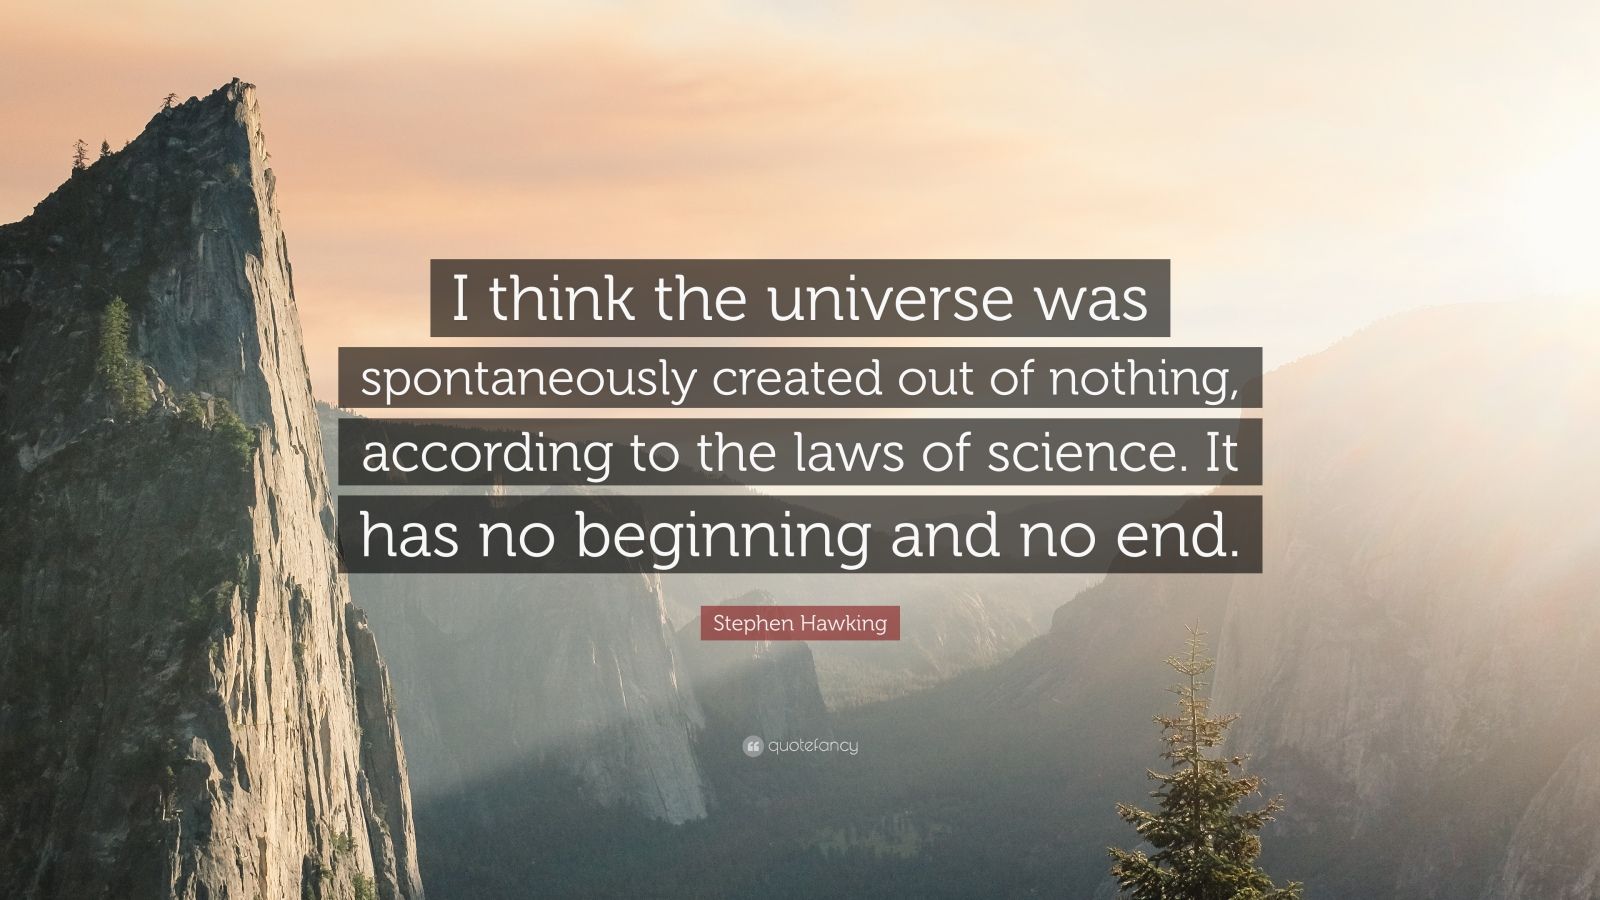 Stephen Hawking Quote: “I think the universe was spontaneously created